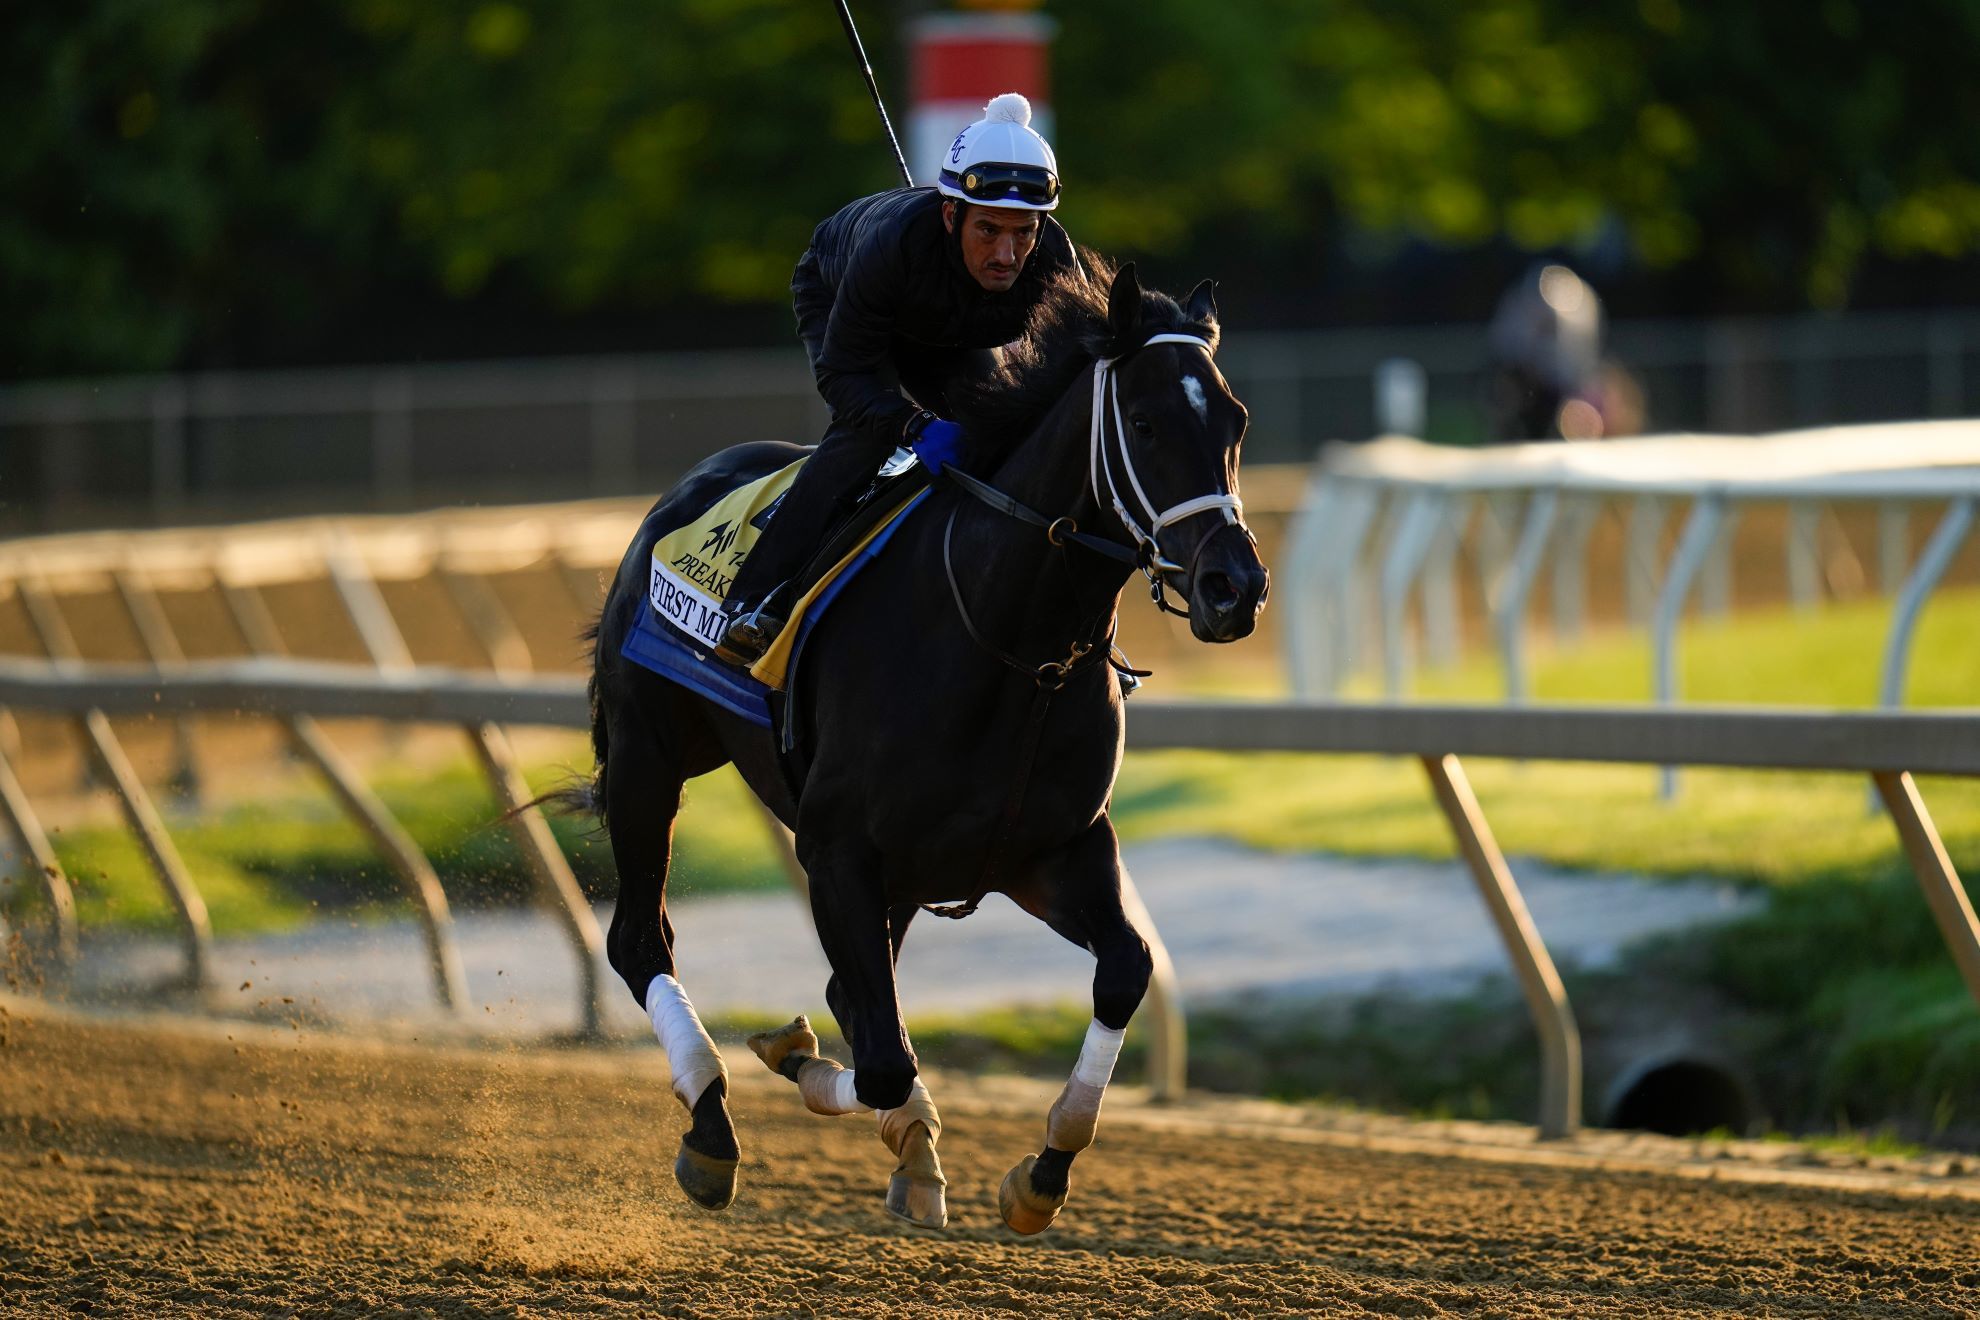 Preakness Stakes entrant First Mission works out ahead of the 148th running of the Preakness Stakes horse.